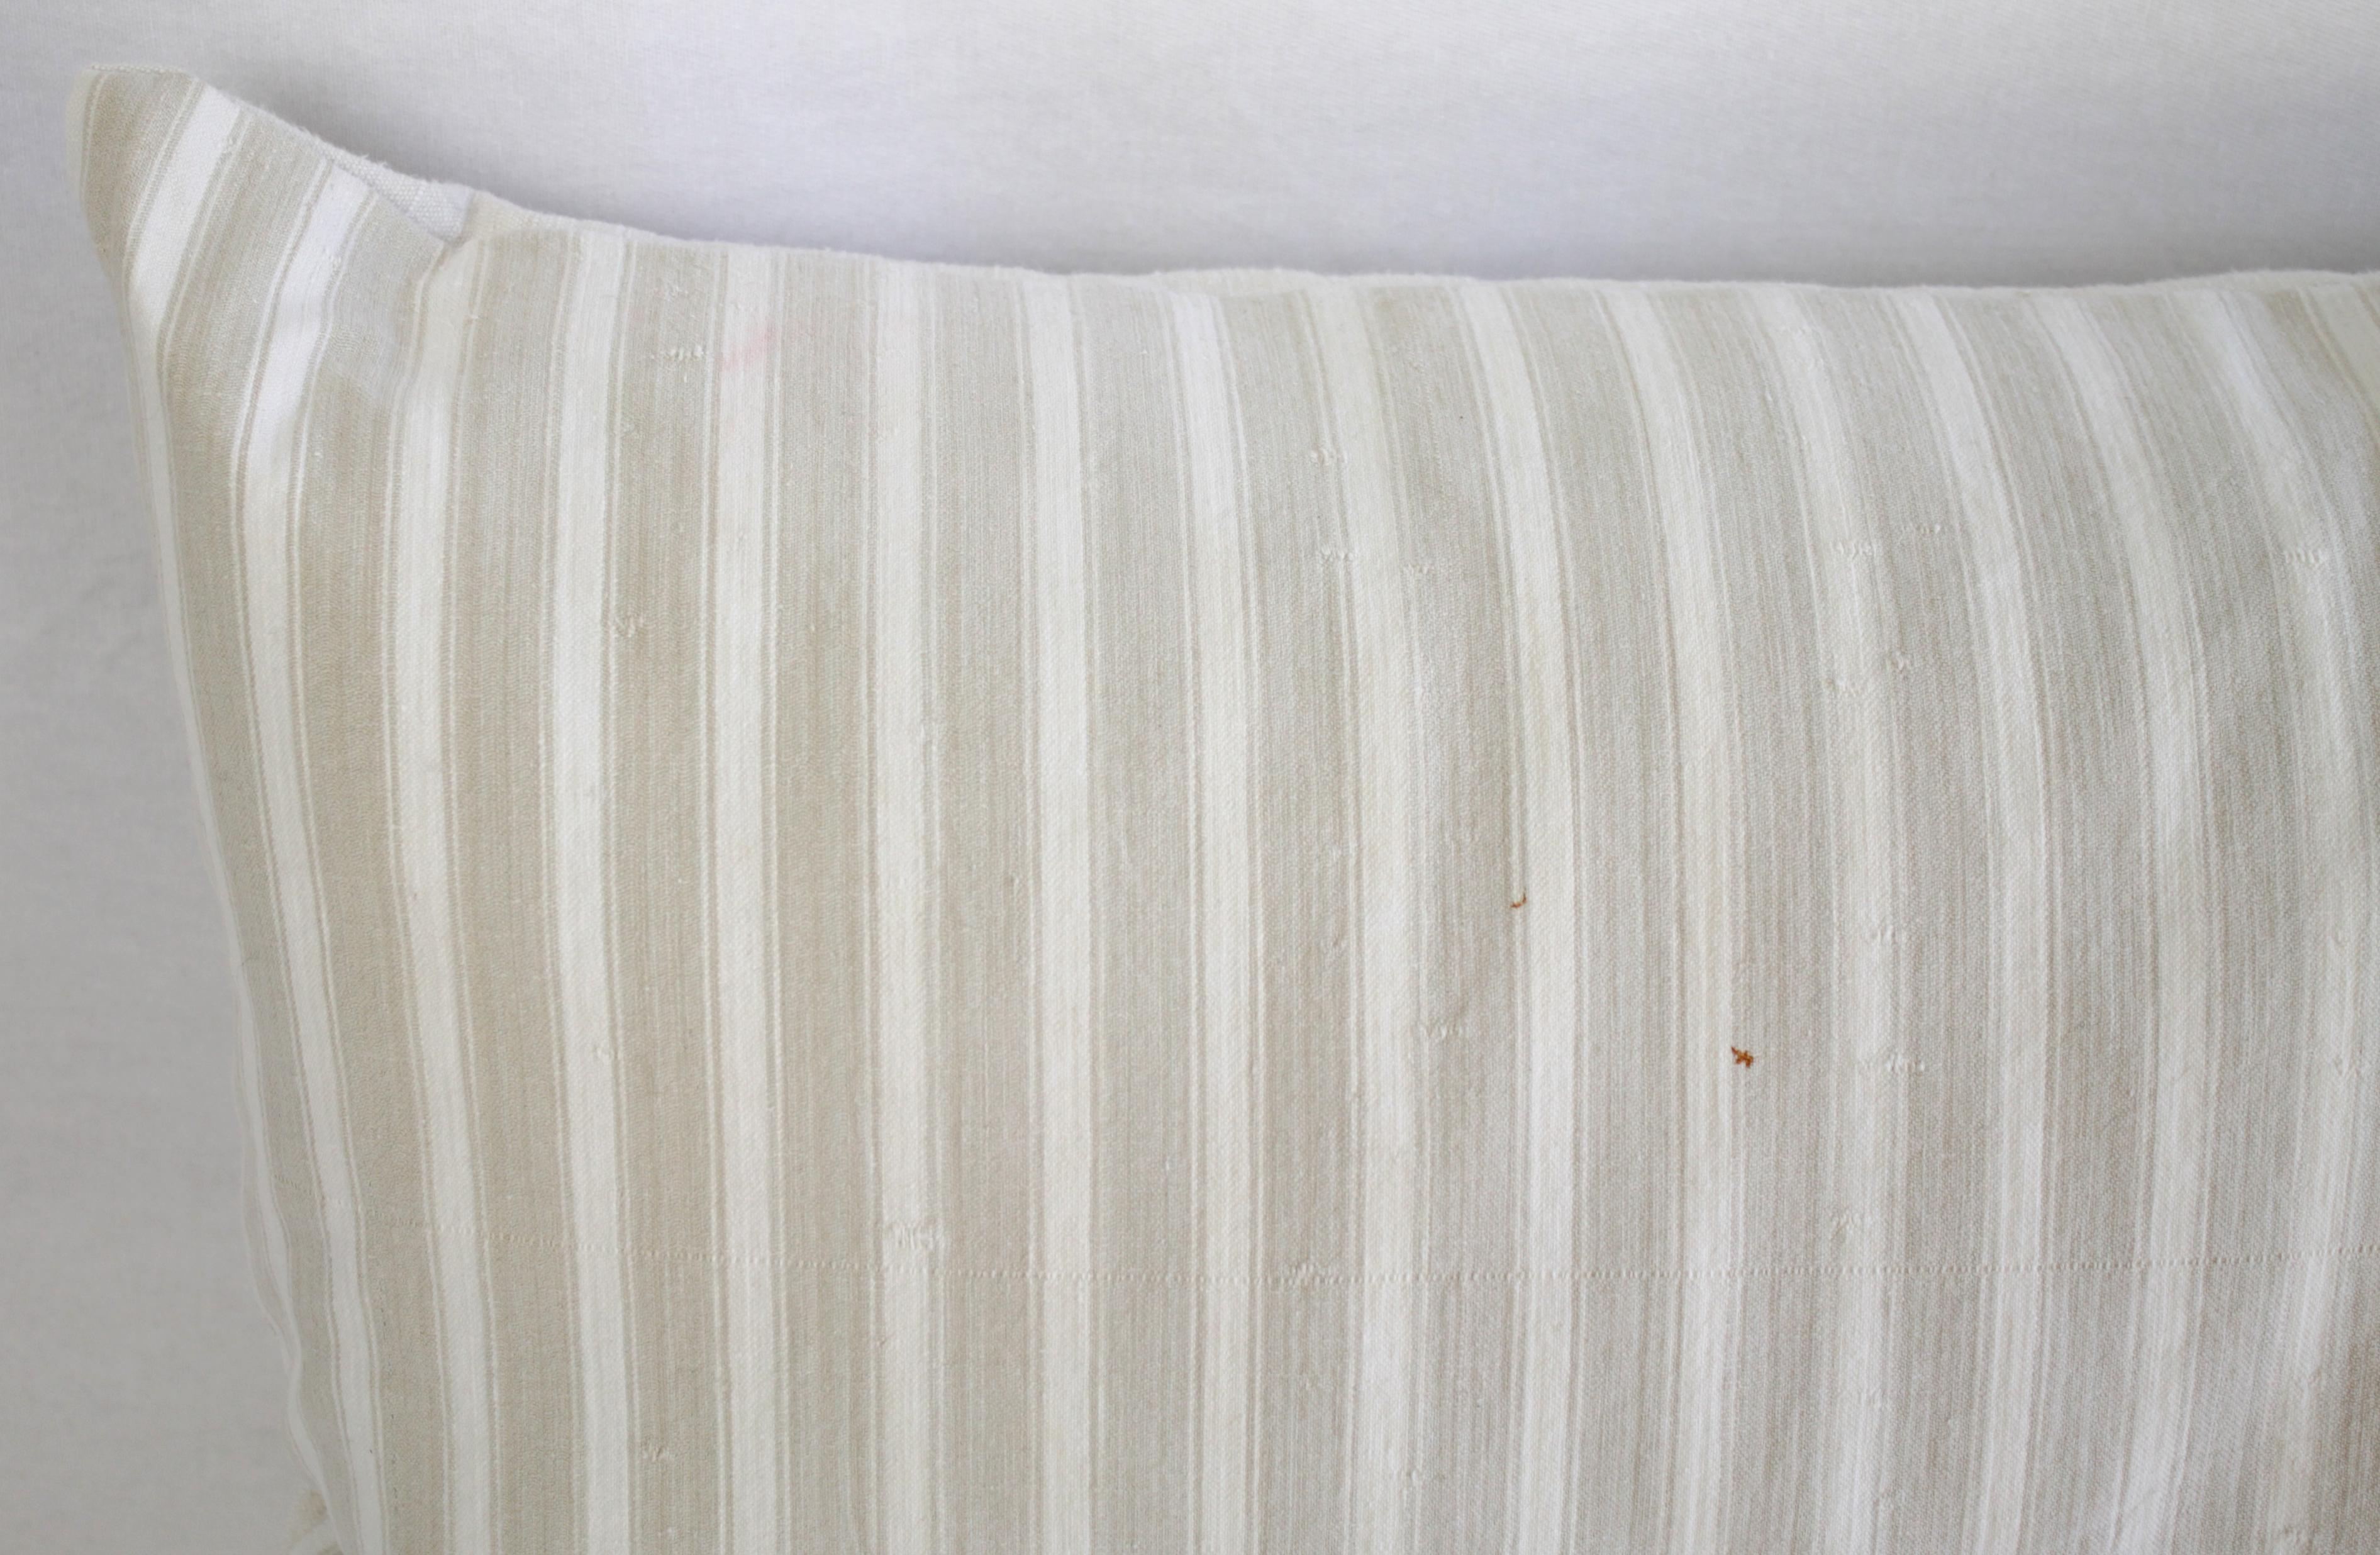 19th century natural French ticking pillow
We custom made this accent pillow from 19th and 20th century textiles. The face is a natural and creamy white ticking stripe, the back is a French homespun linen.
Measures: 13 x 30 with hidden zipper